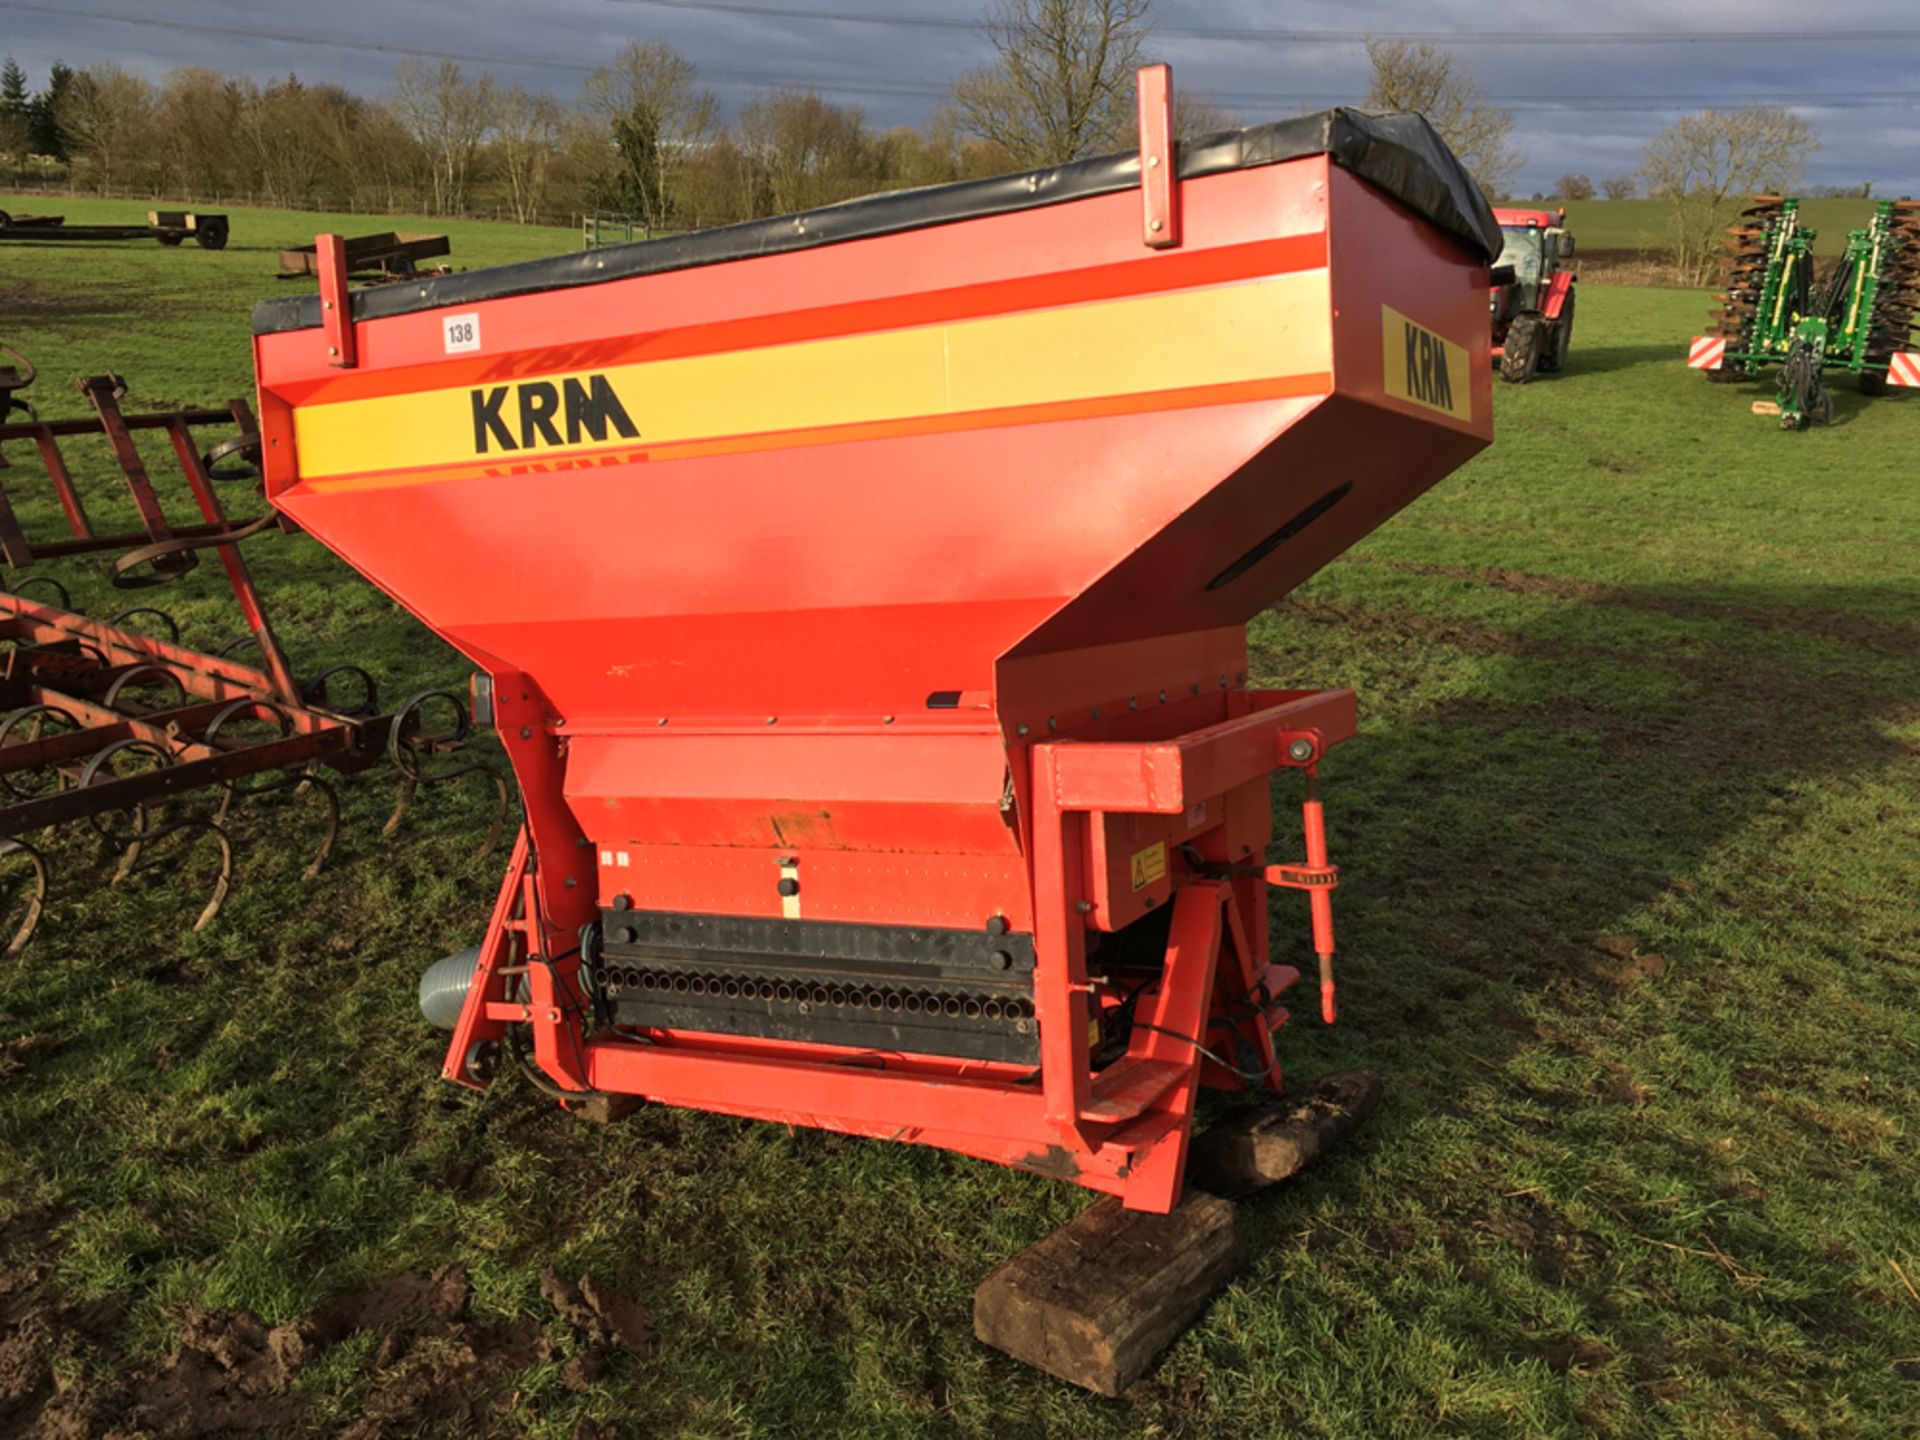 KRM drill hopper and coulters